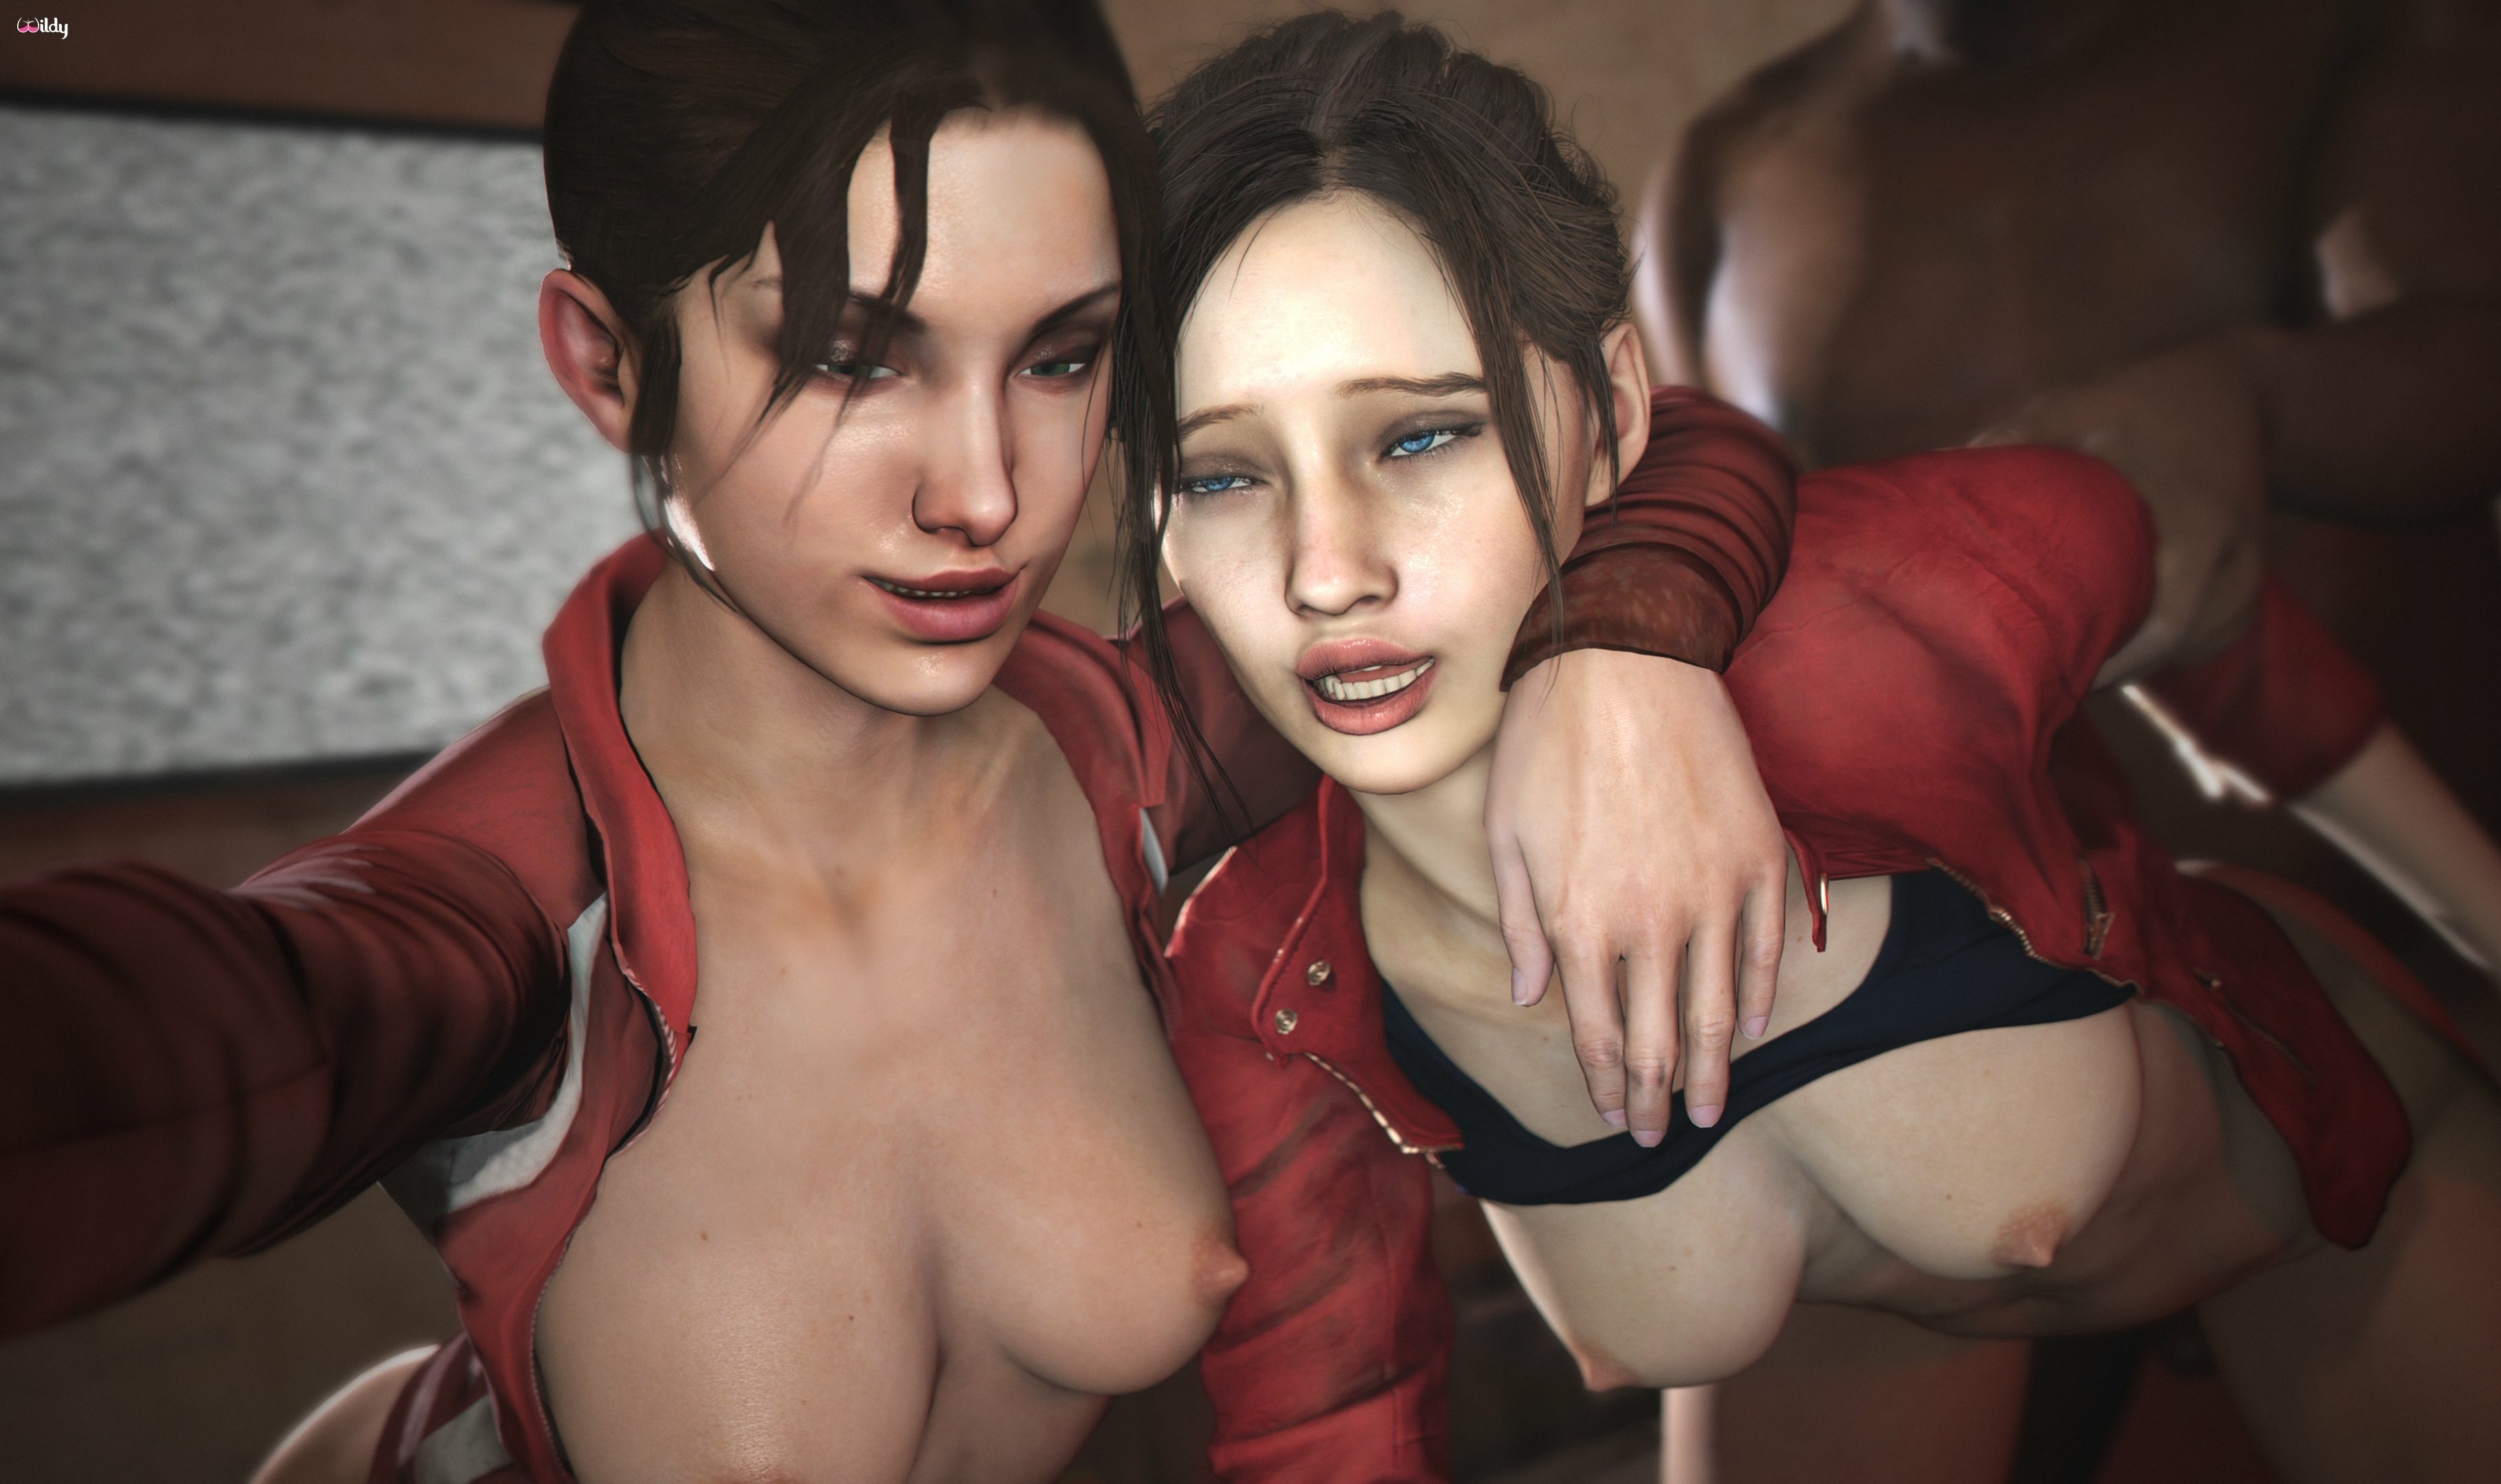 Recovery efforts have begun 💦 Zoey Left4dead Claire Redfield Resident Evil Sexy Lingerie Boobs Big boobs Tits Naked Cake Ass Sexy Horny Face Horny 3d Porn